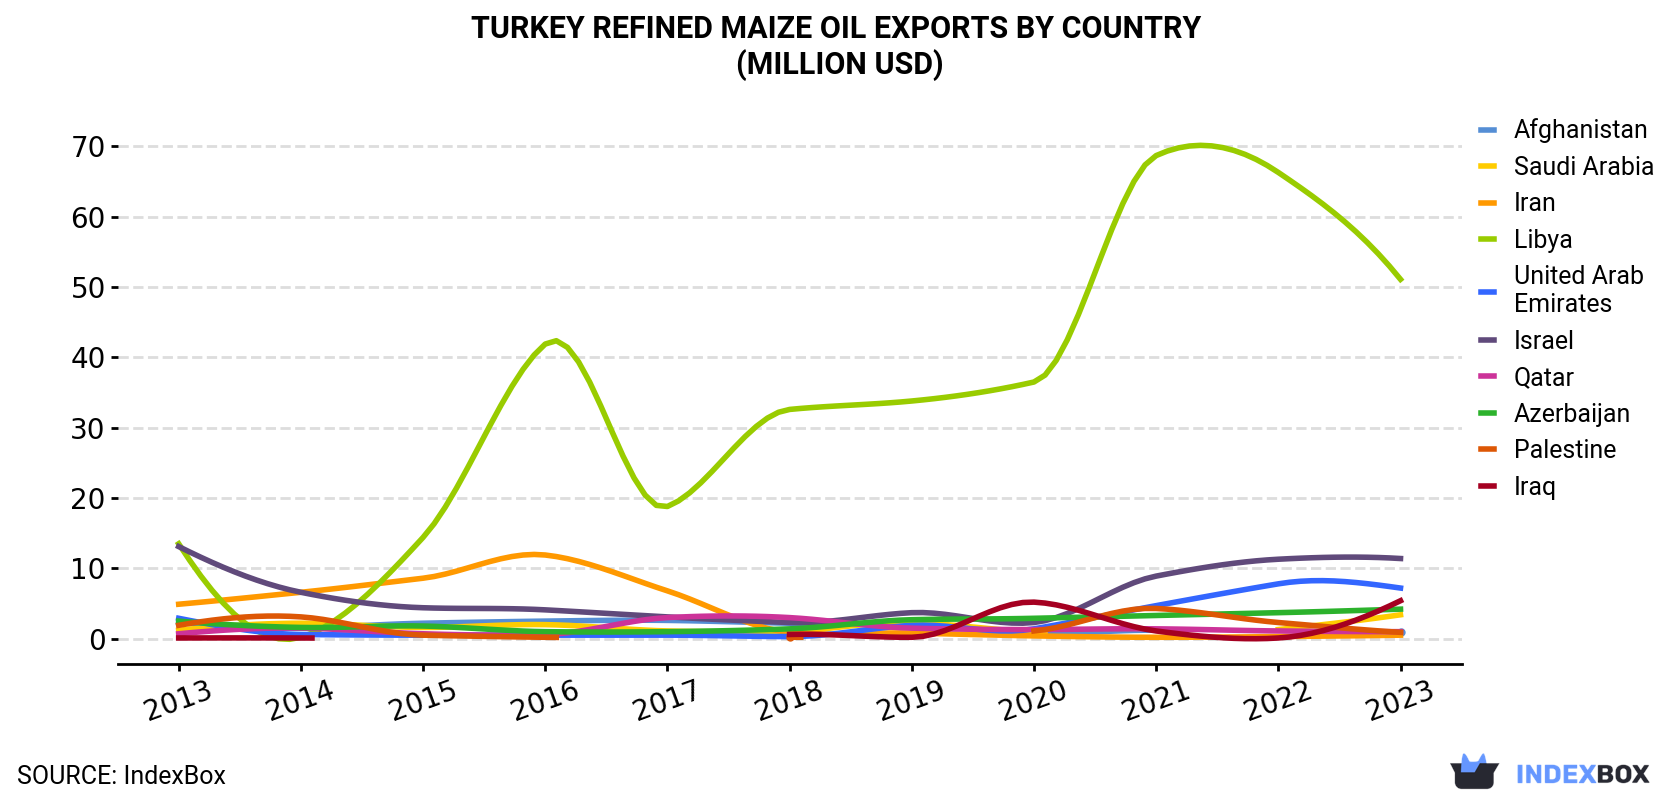 Turkey Refined Maize Oil Exports By Country (Million USD)